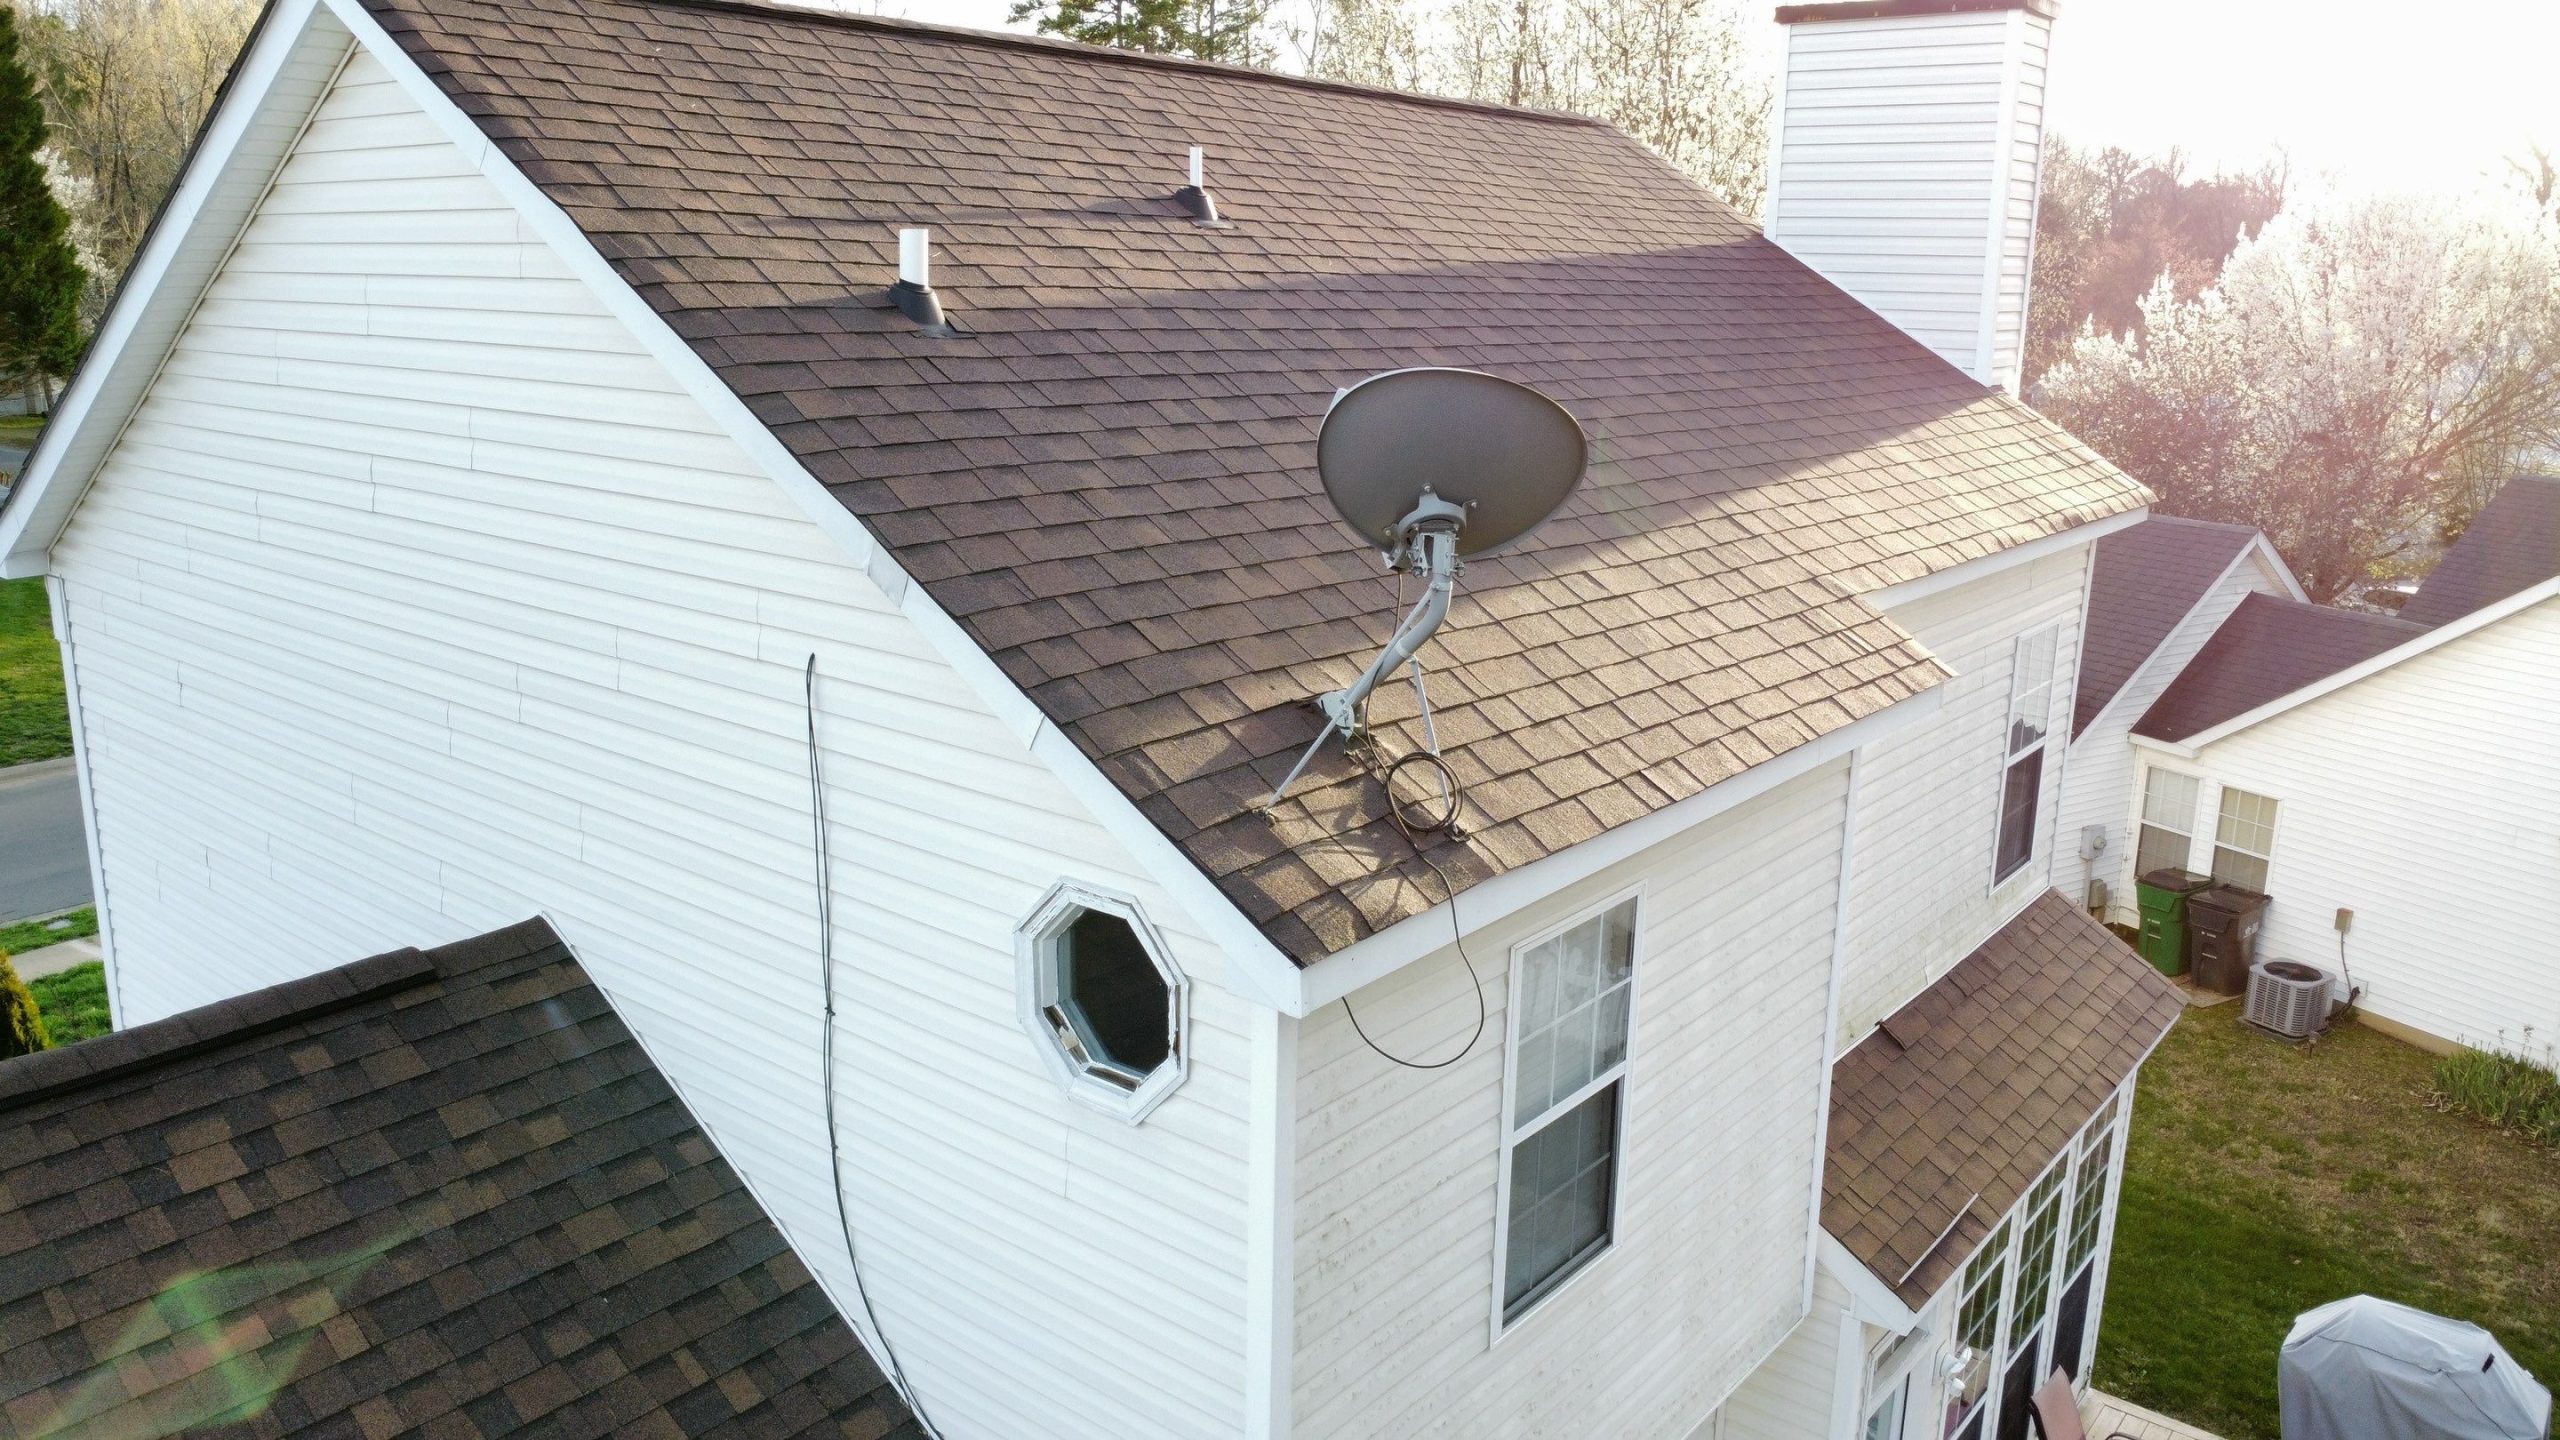 Complete Guide to Satellite Dish Roof Removal